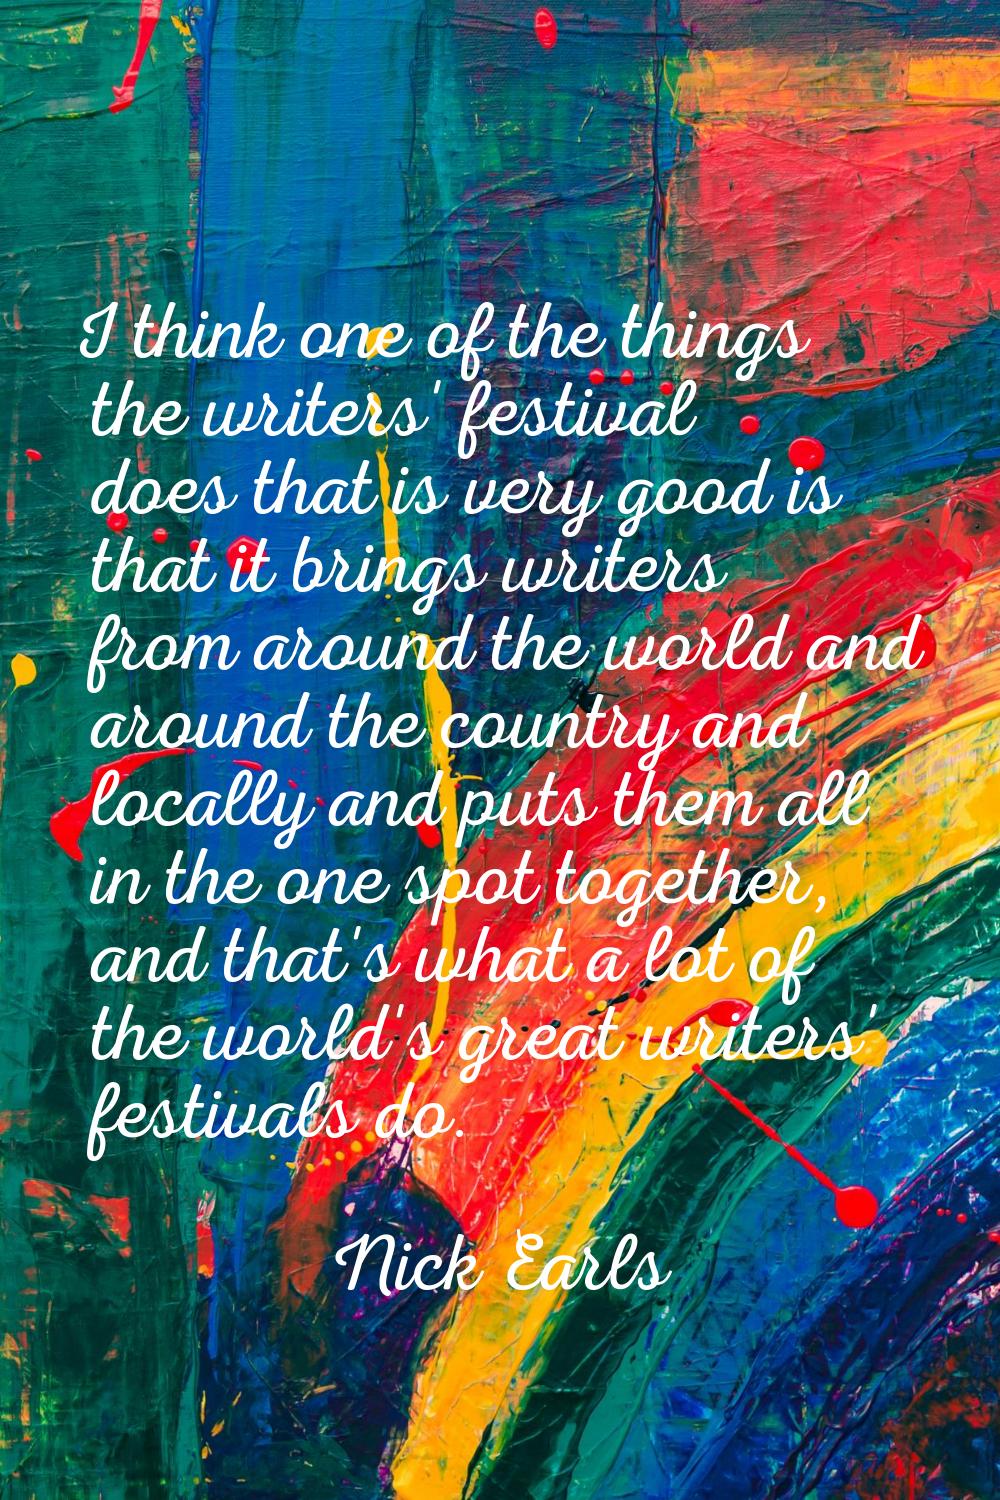 I think one of the things the writers' festival does that is very good is that it brings writers fr